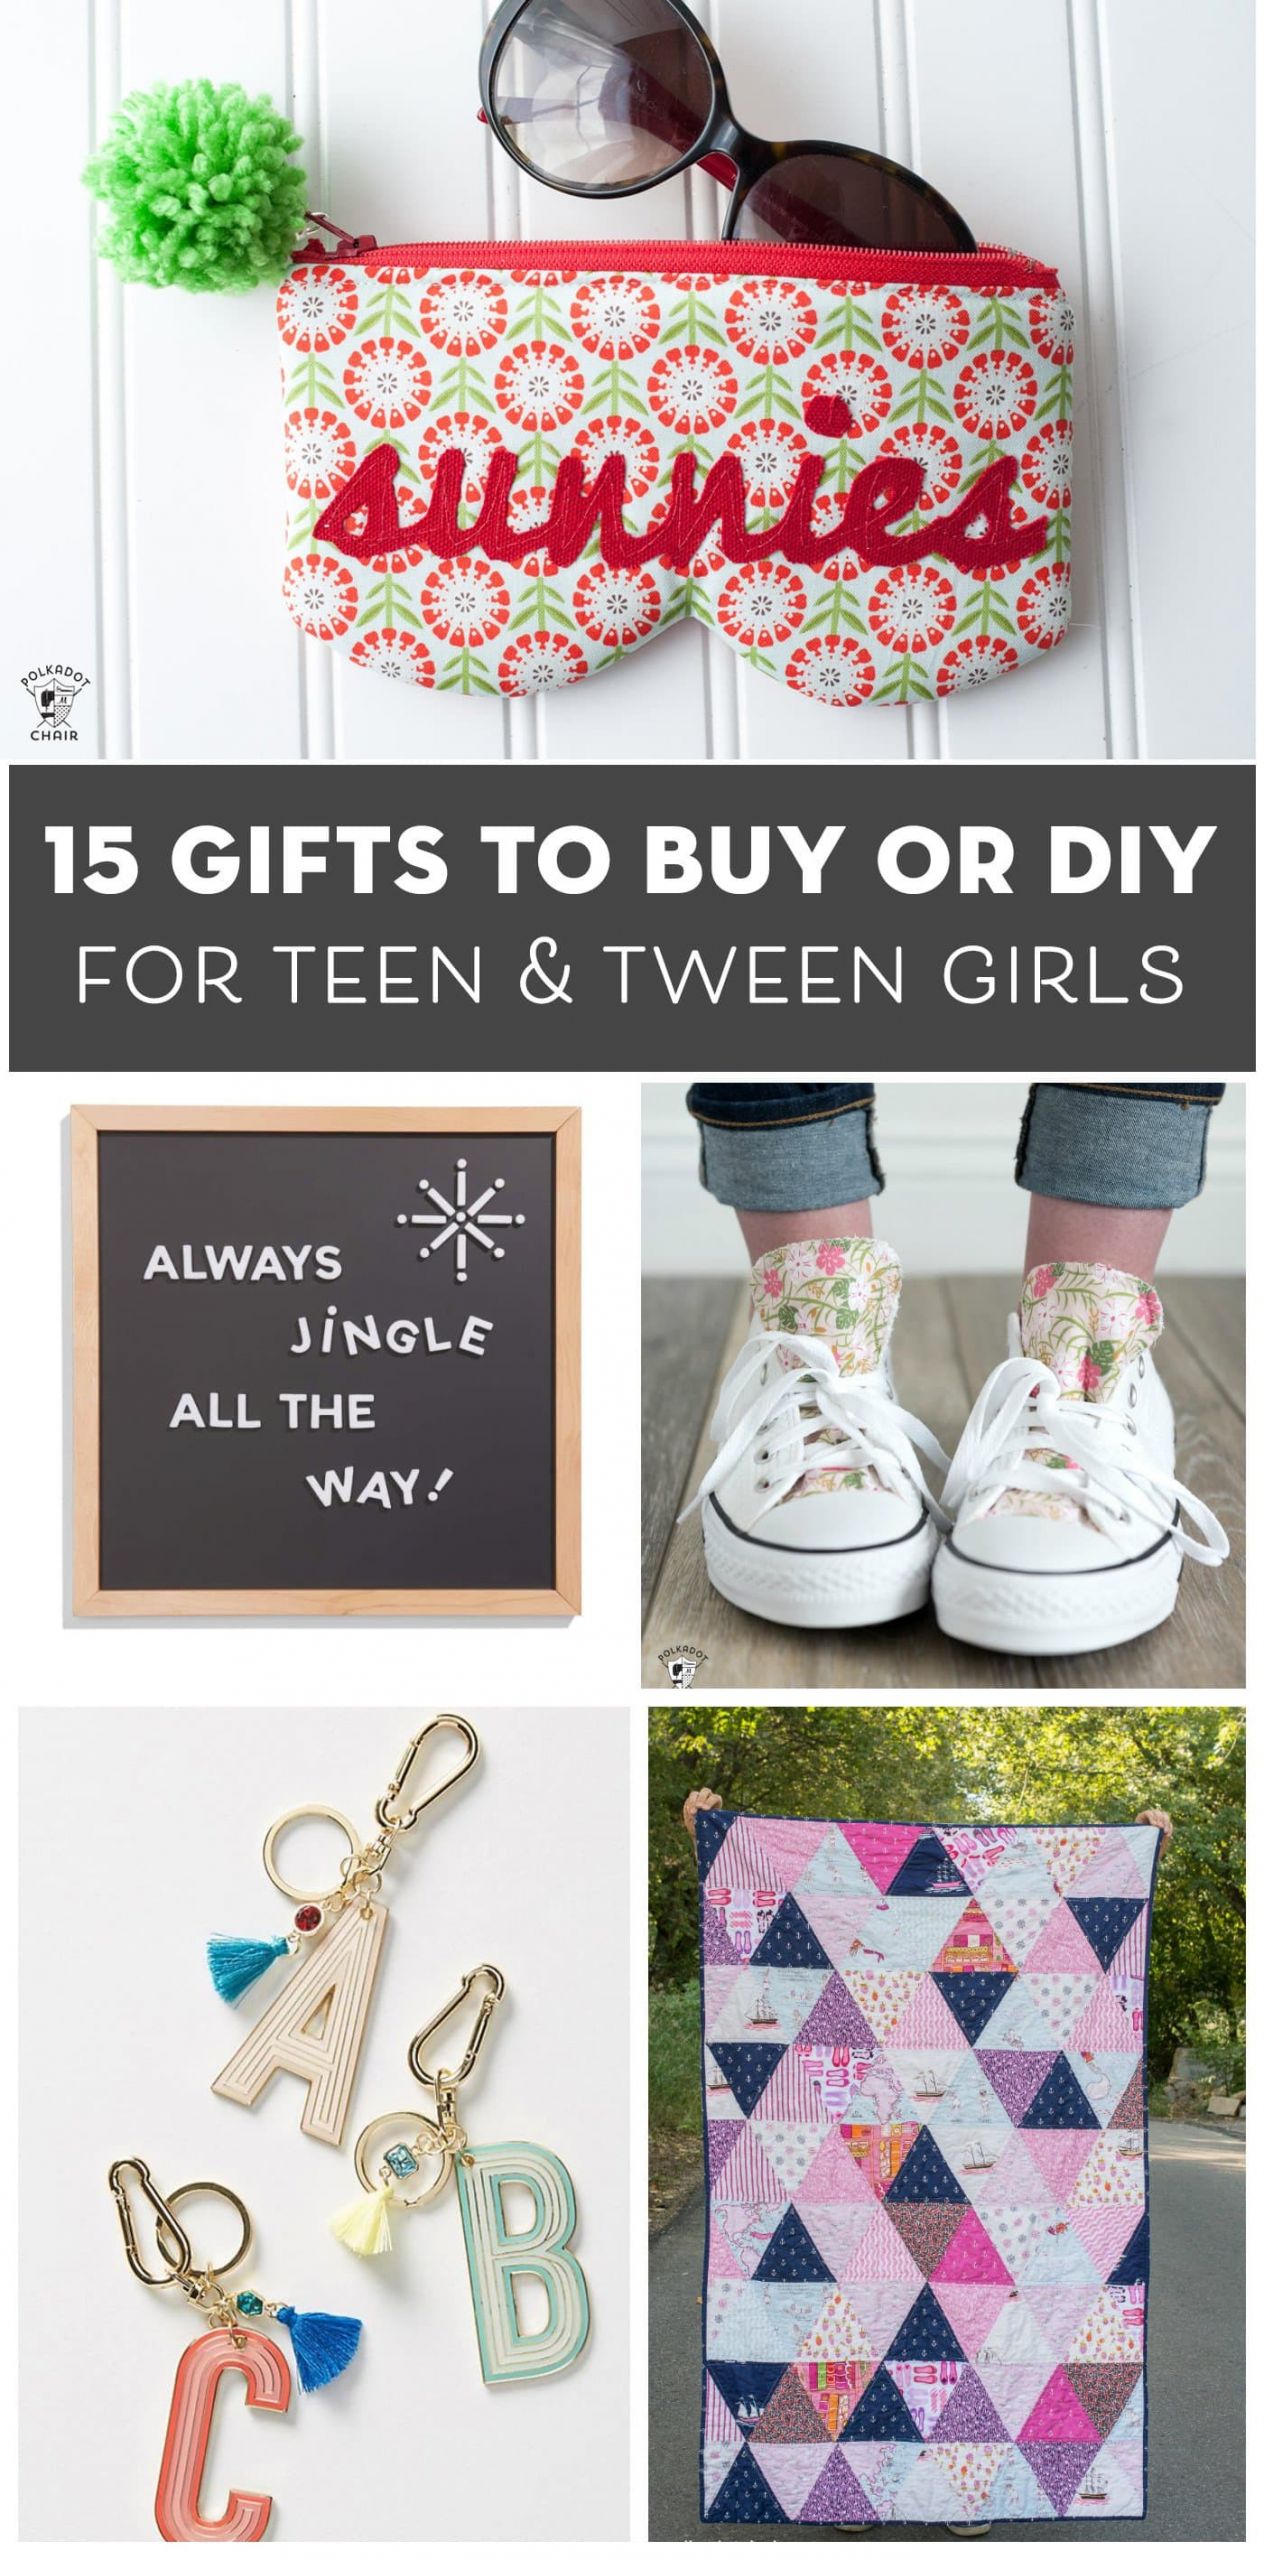 Gift Ideas For Teenage Girls
 15 Gift Ideas for Teenage Girls That You Can DIY or Buy